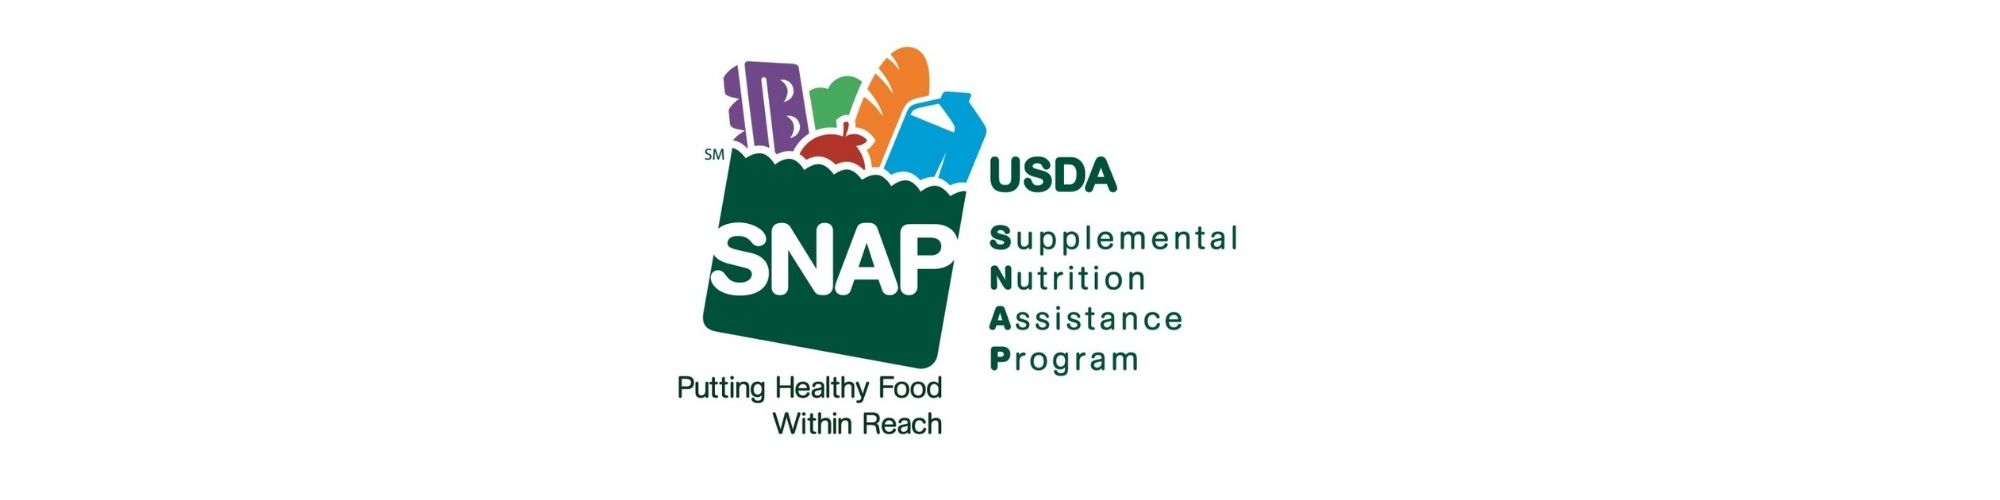 USDA, SNAP, Supplemental Nutrition Assistance Program, Putting Healthy Food Within Reach